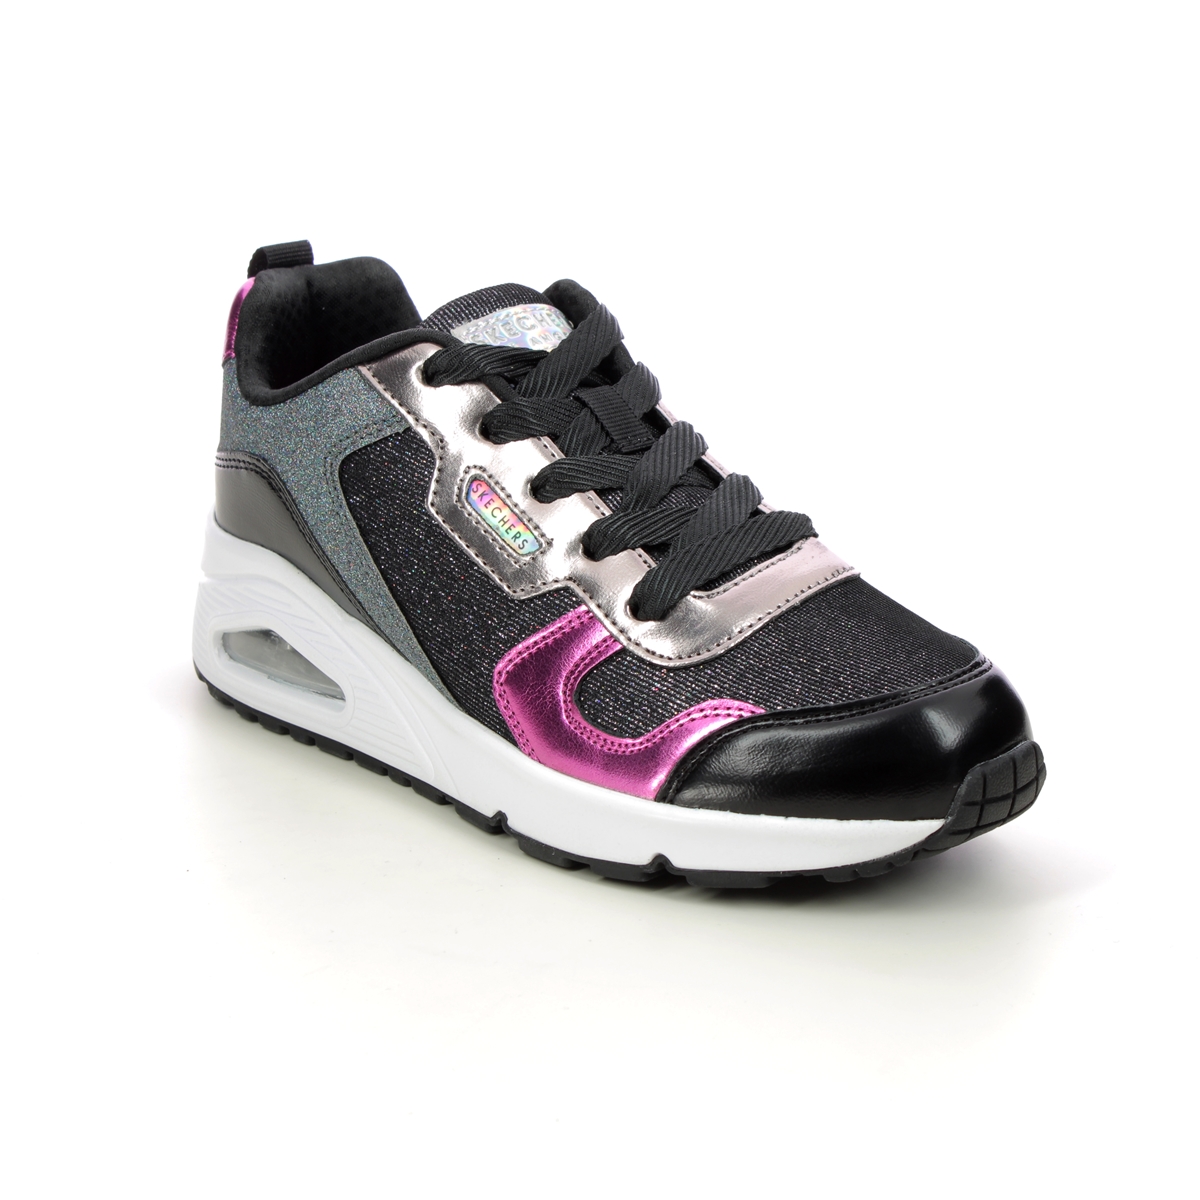 Skechers Uno Remix Lace Black Kids Girls Trainers 310513L In Size 38 In Plain Black For kids